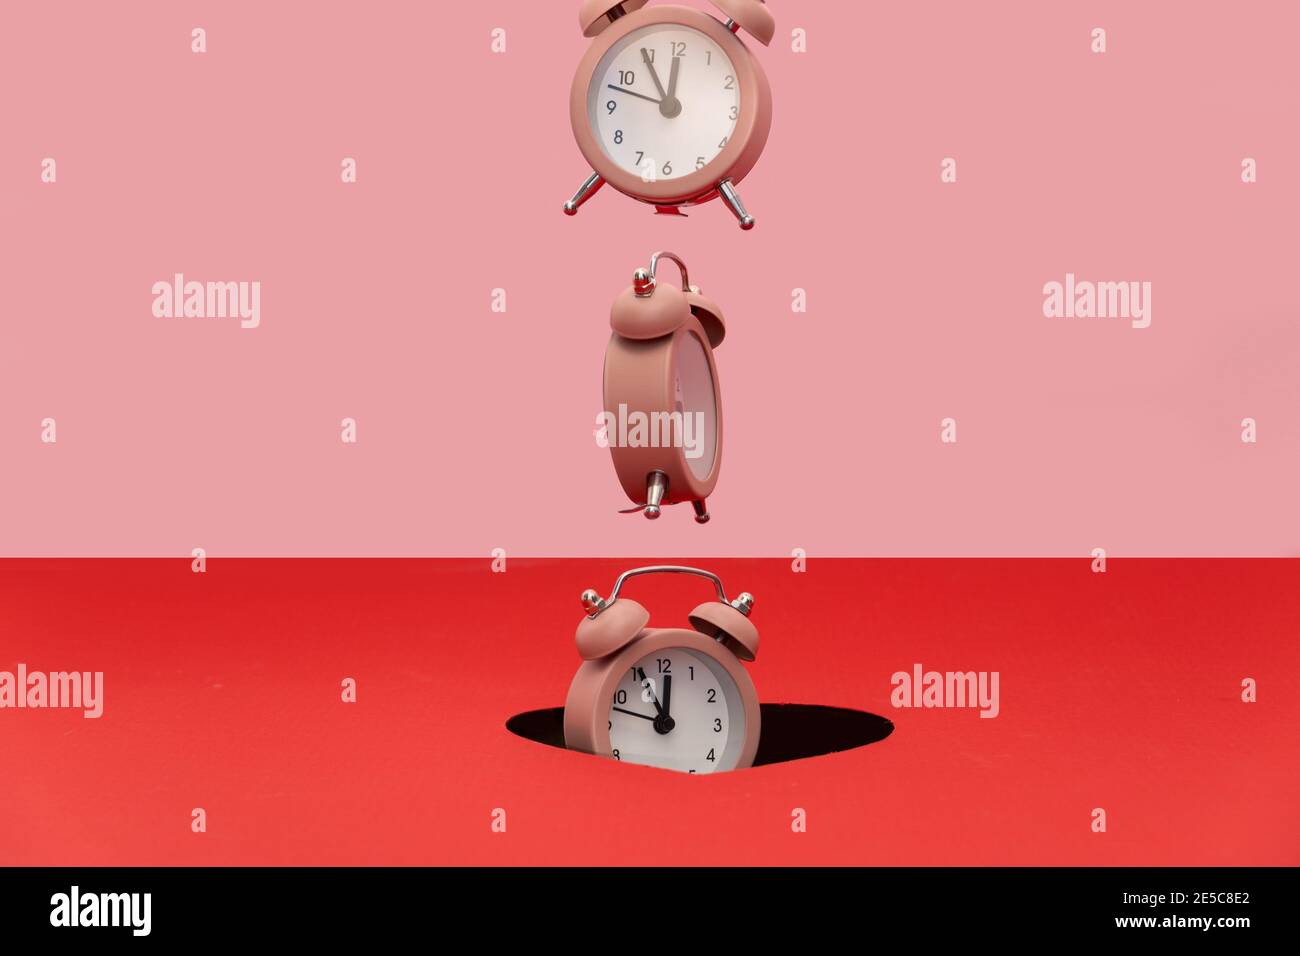 Alarm clock is falling trough the hole. Dual tone background. Creative time concept Stock Photo